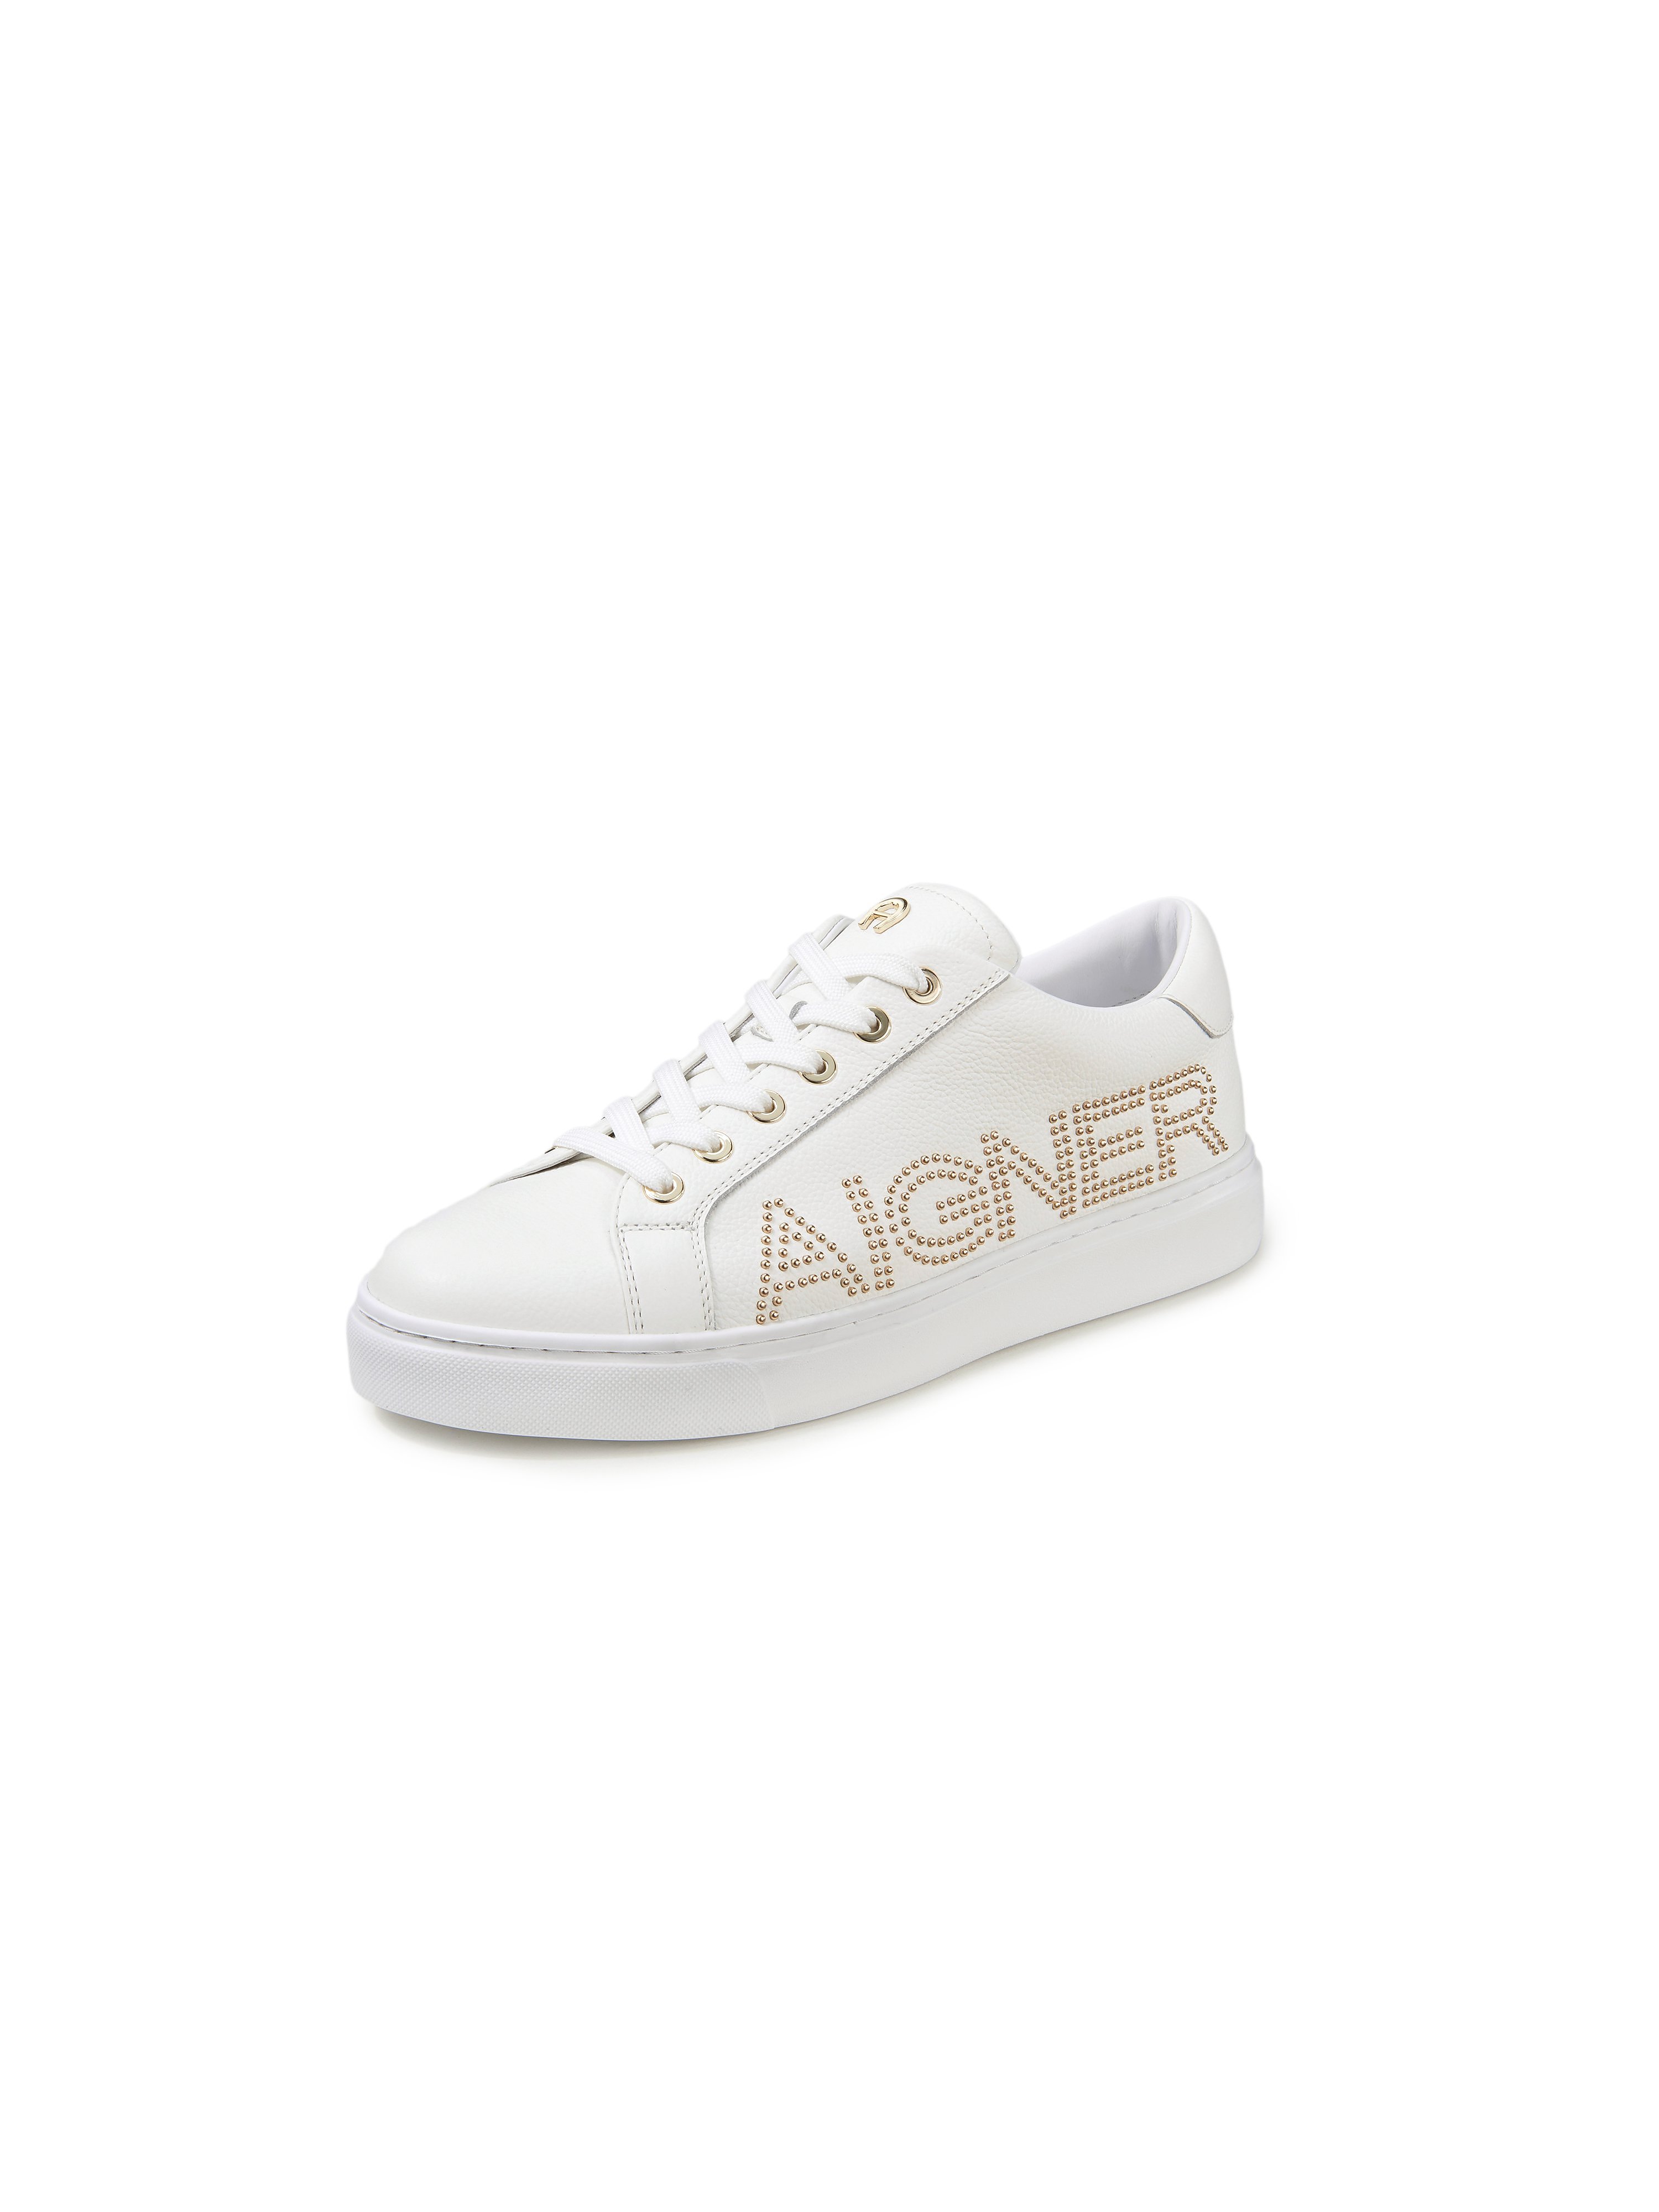 Les sneakers  Aigner blanc taille 41